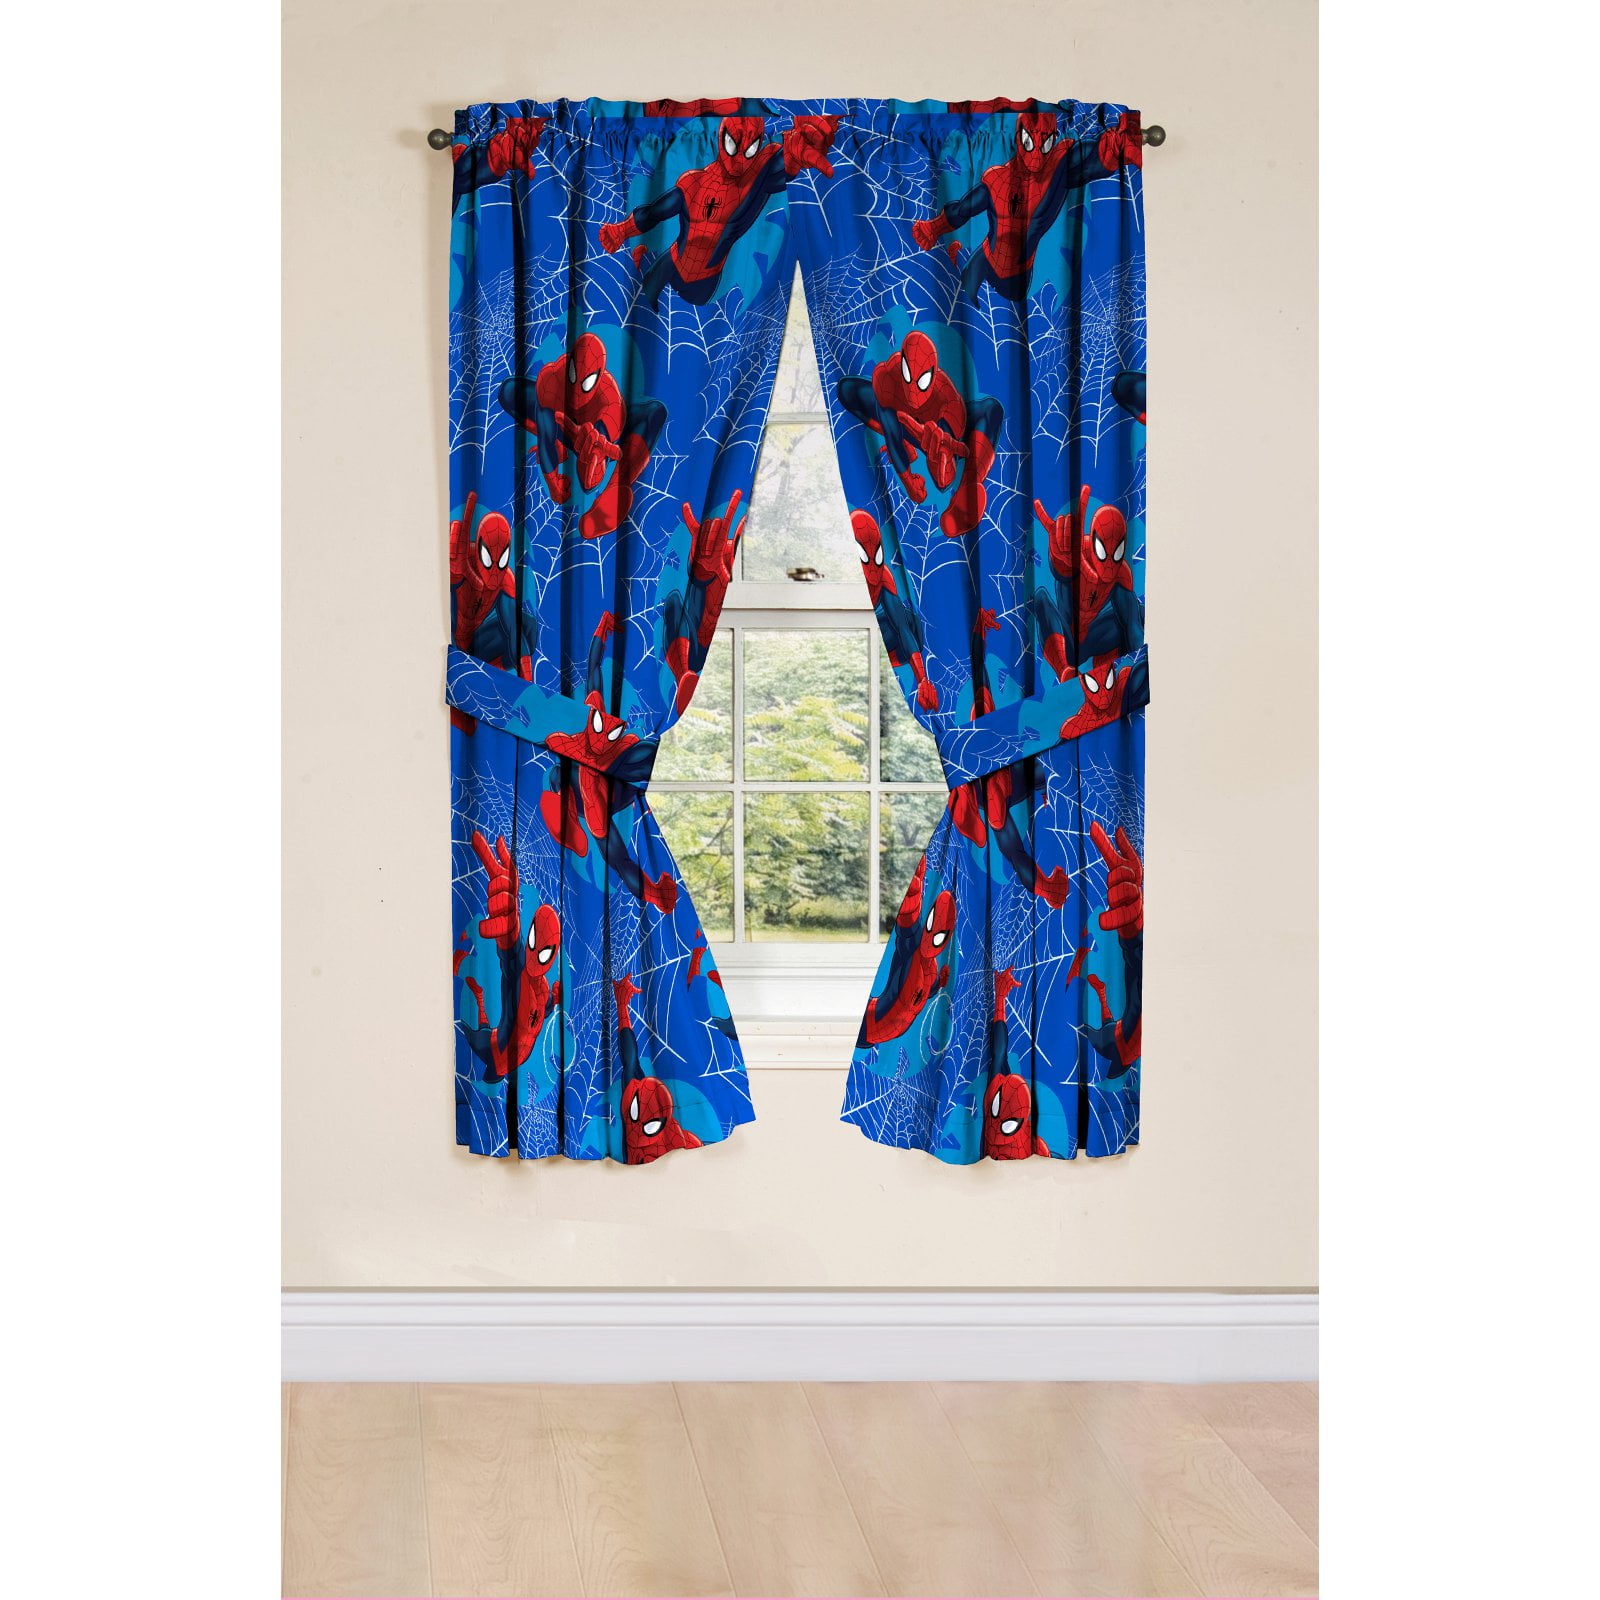 2Panel Spider-Man Into the Spider-Verse Window Curtain Blackout Drapes Curtains 